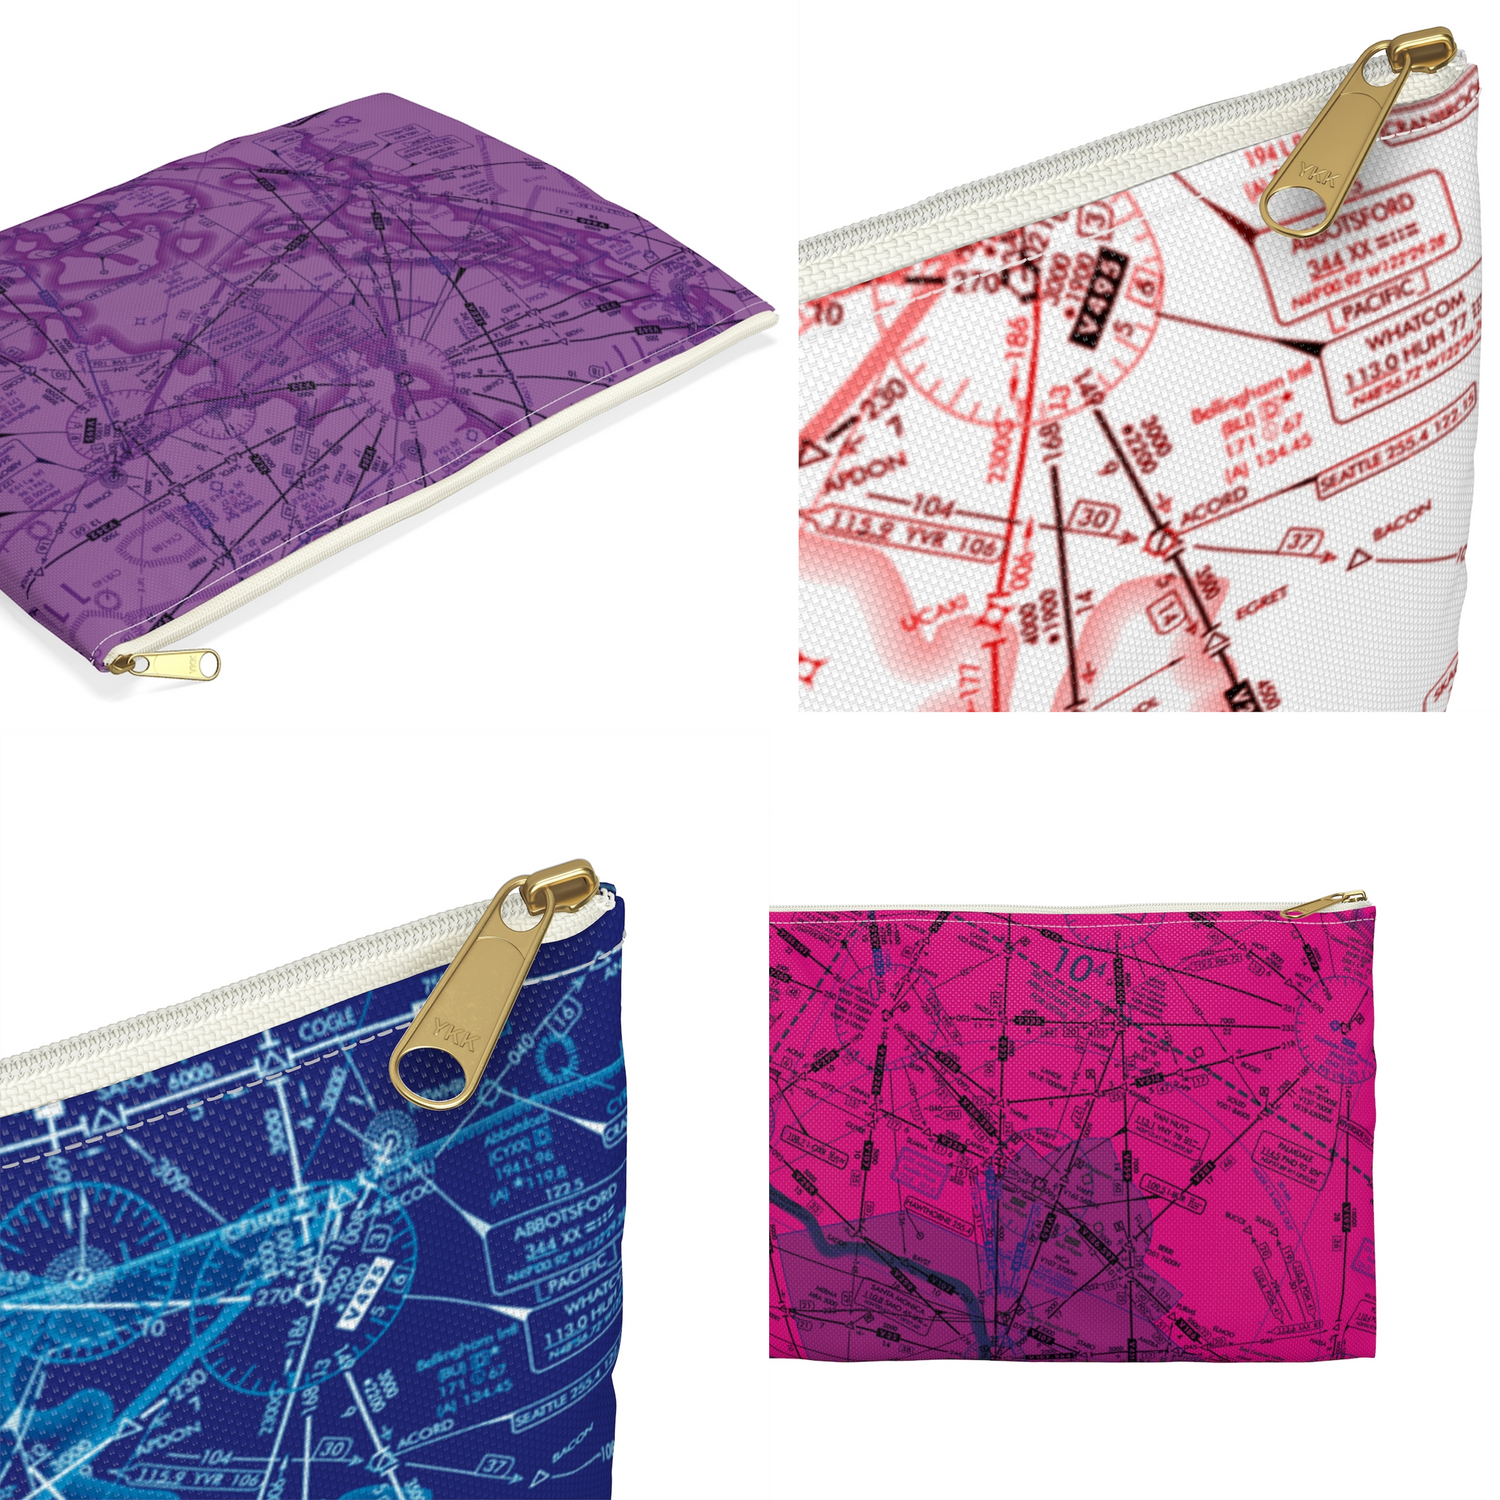 Aviation themed flat pouches in two sizes with zipper closure